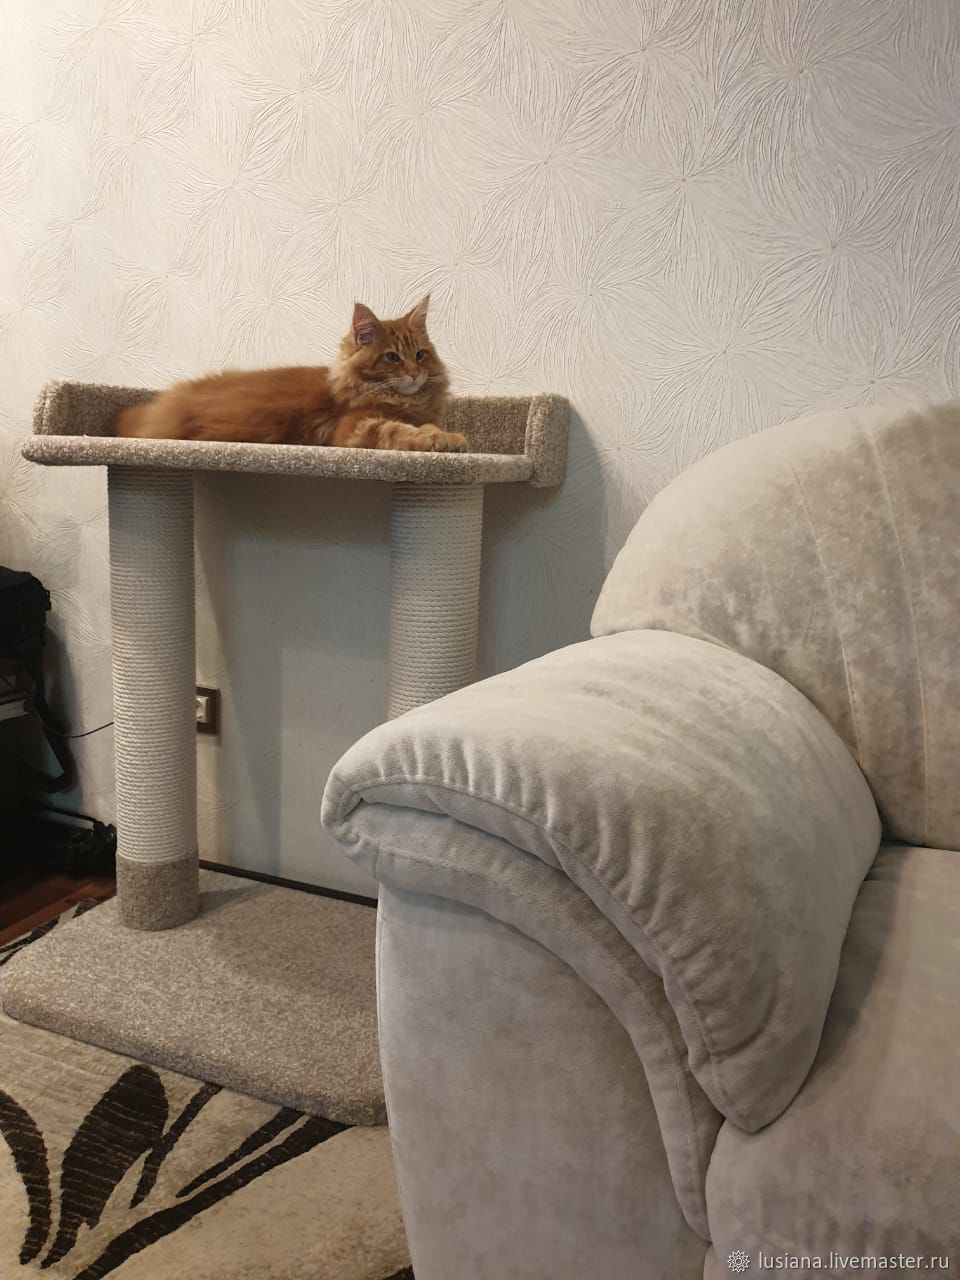 cat scratching post with bed